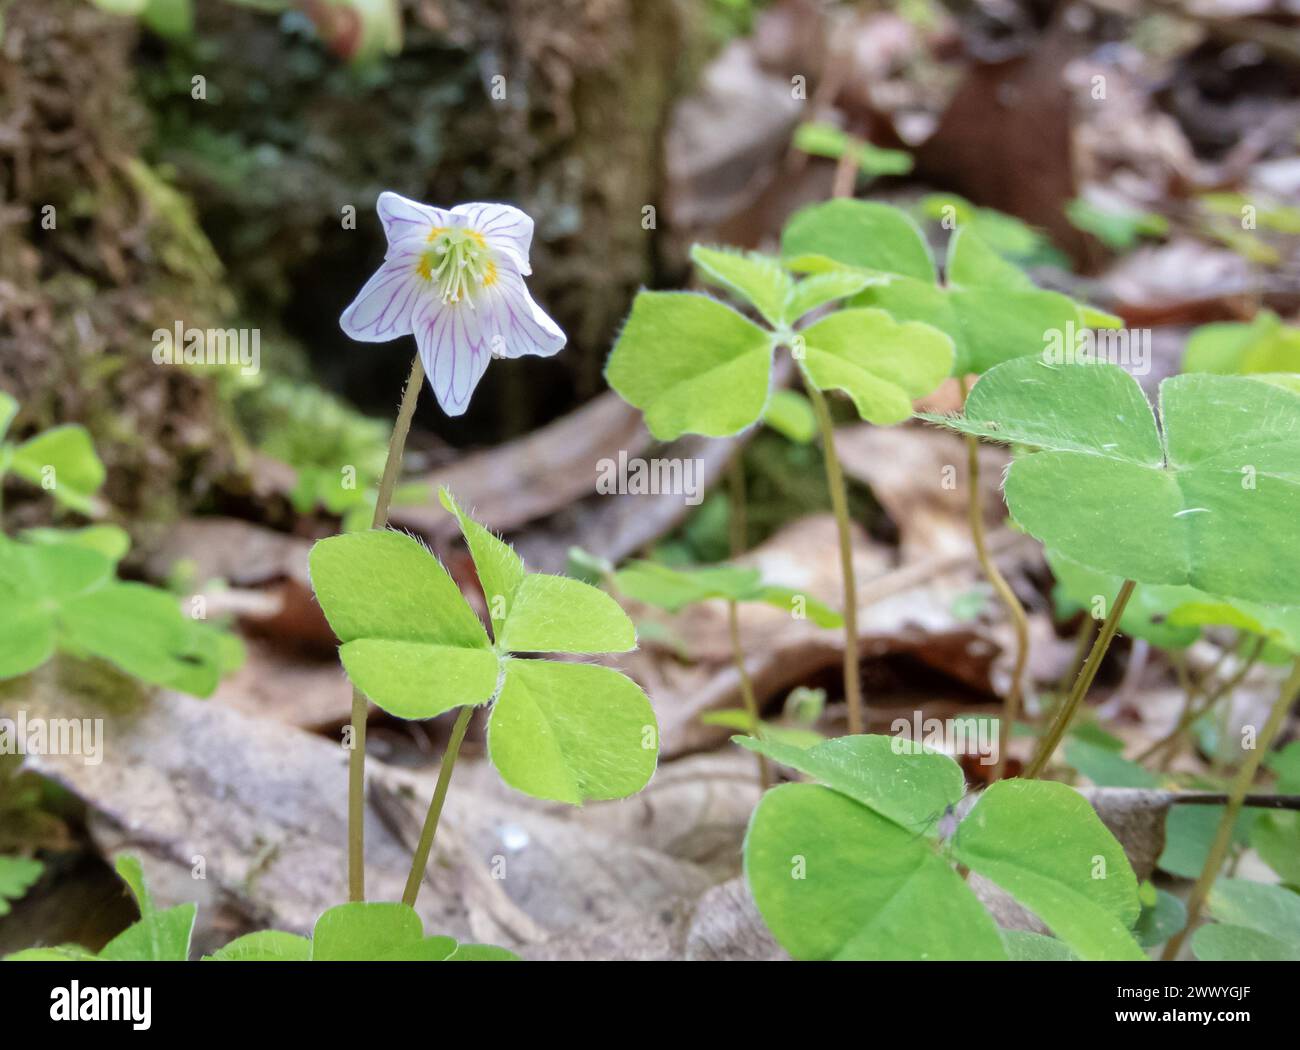 Oxalis acetosella white flower with pink venation and trifoliate leaves. Wood sorrel or common wood sorrel plant in the forest near Salas,Asturias,Spa Stock Photo